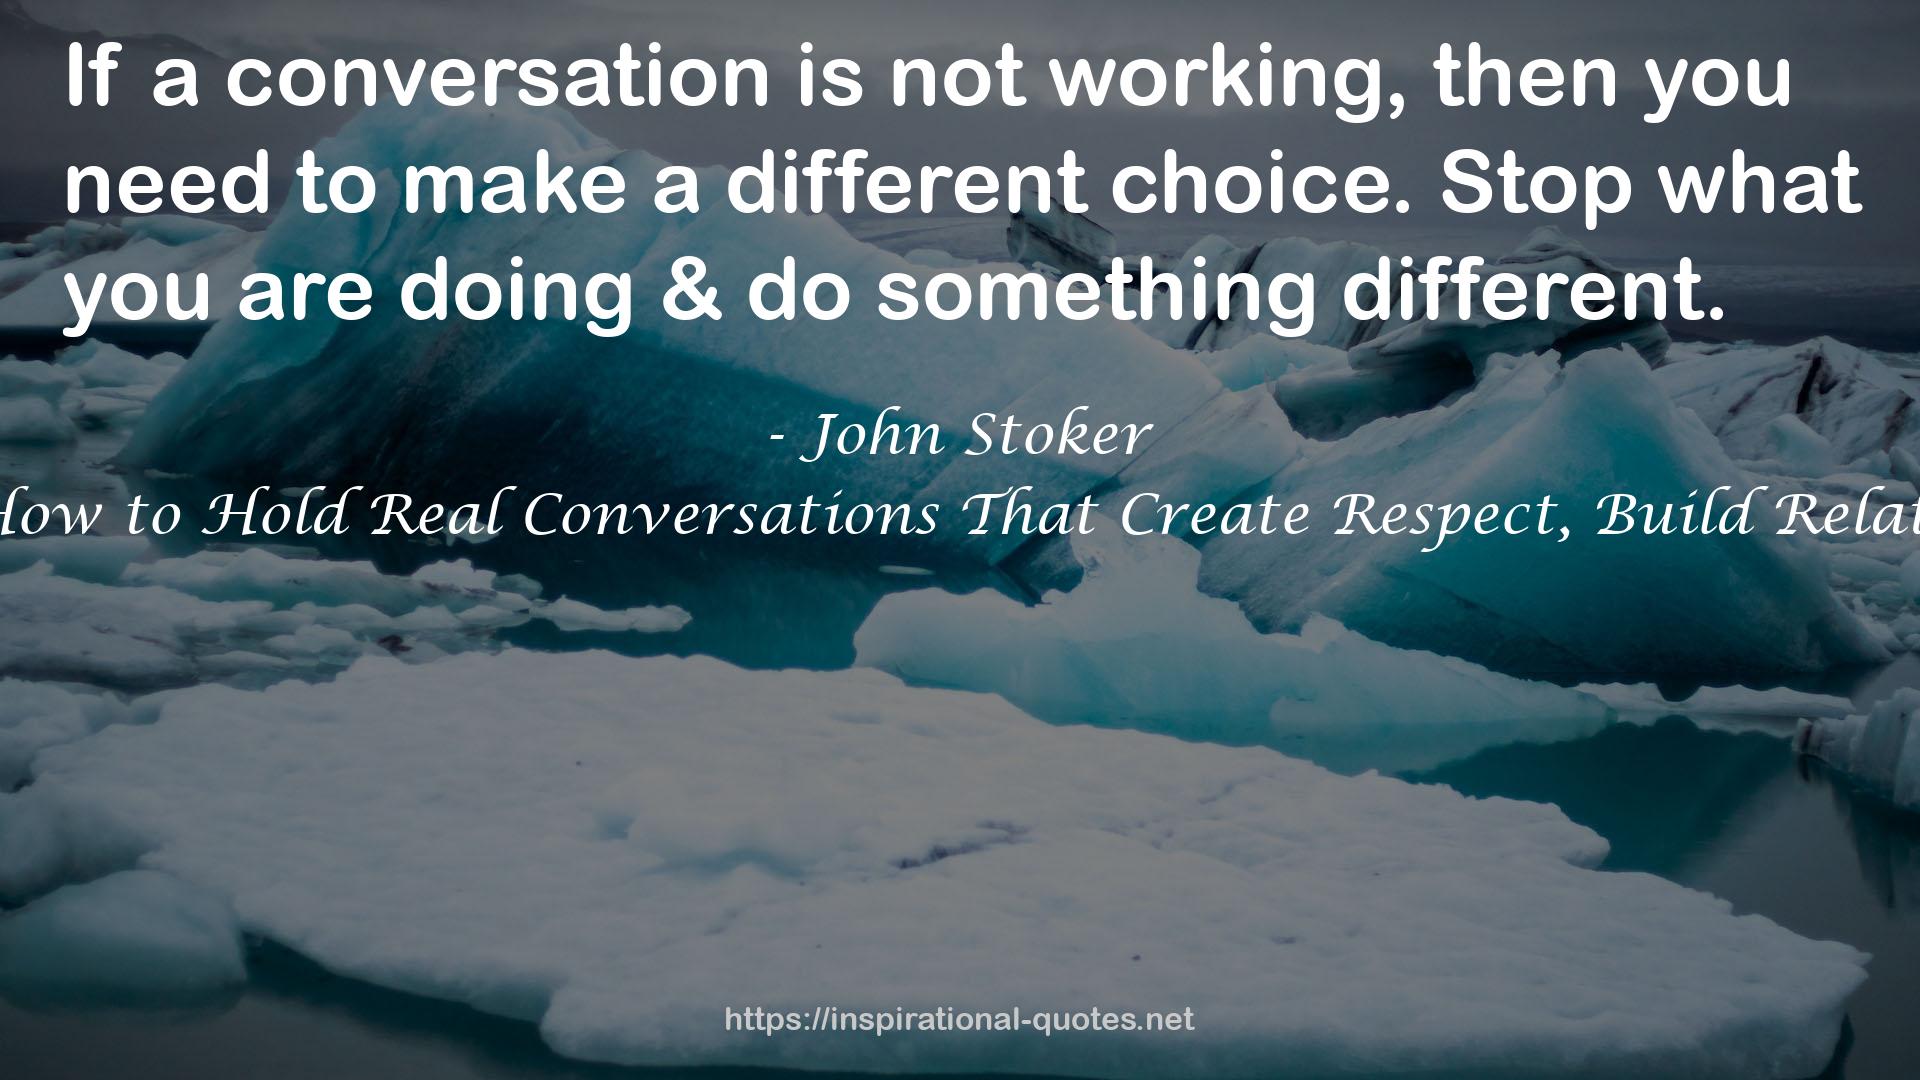 Overcoming Fake Talk: How to Hold Real Conversations That Create Respect, Build Relationships, and Get Results QUOTES